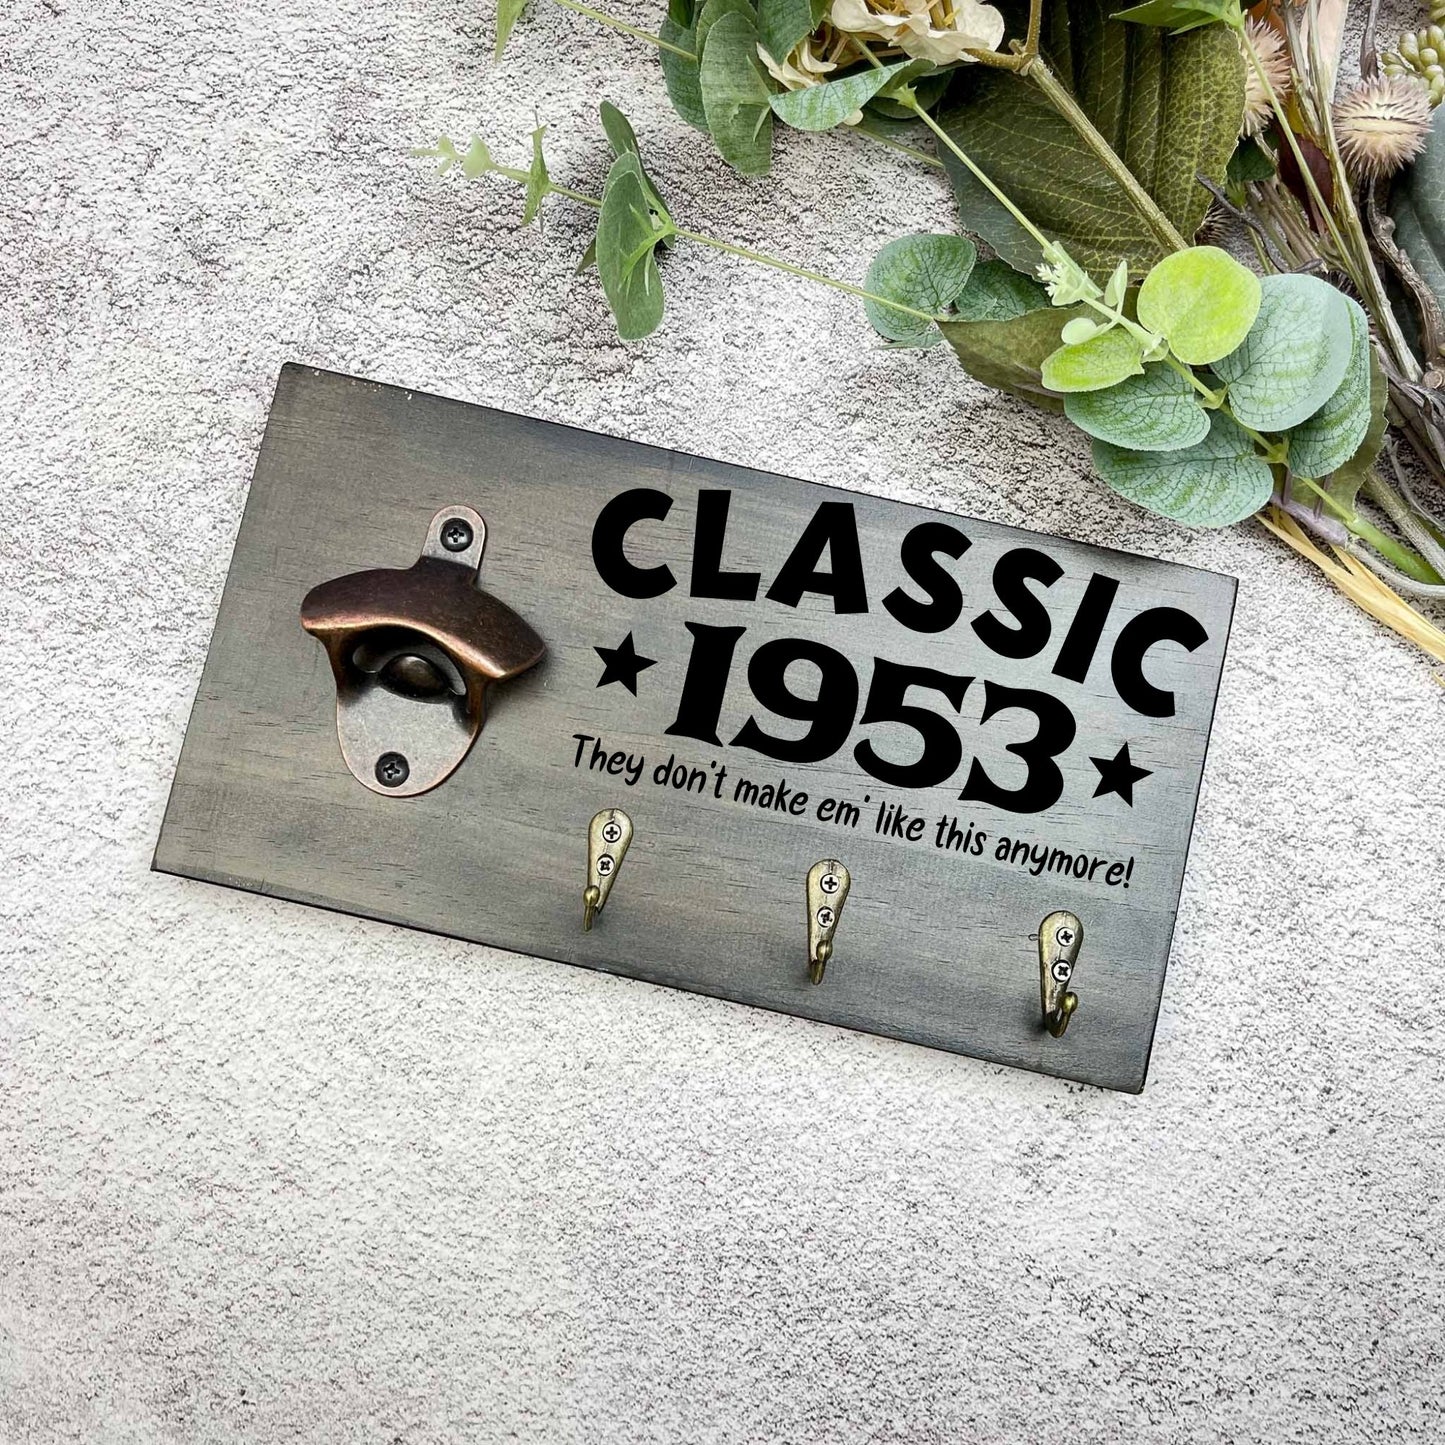 Classic 70th Birthday beer sign, 1953 beer sign gift, 1954 birthday, 70th celebration, bottle opener sign